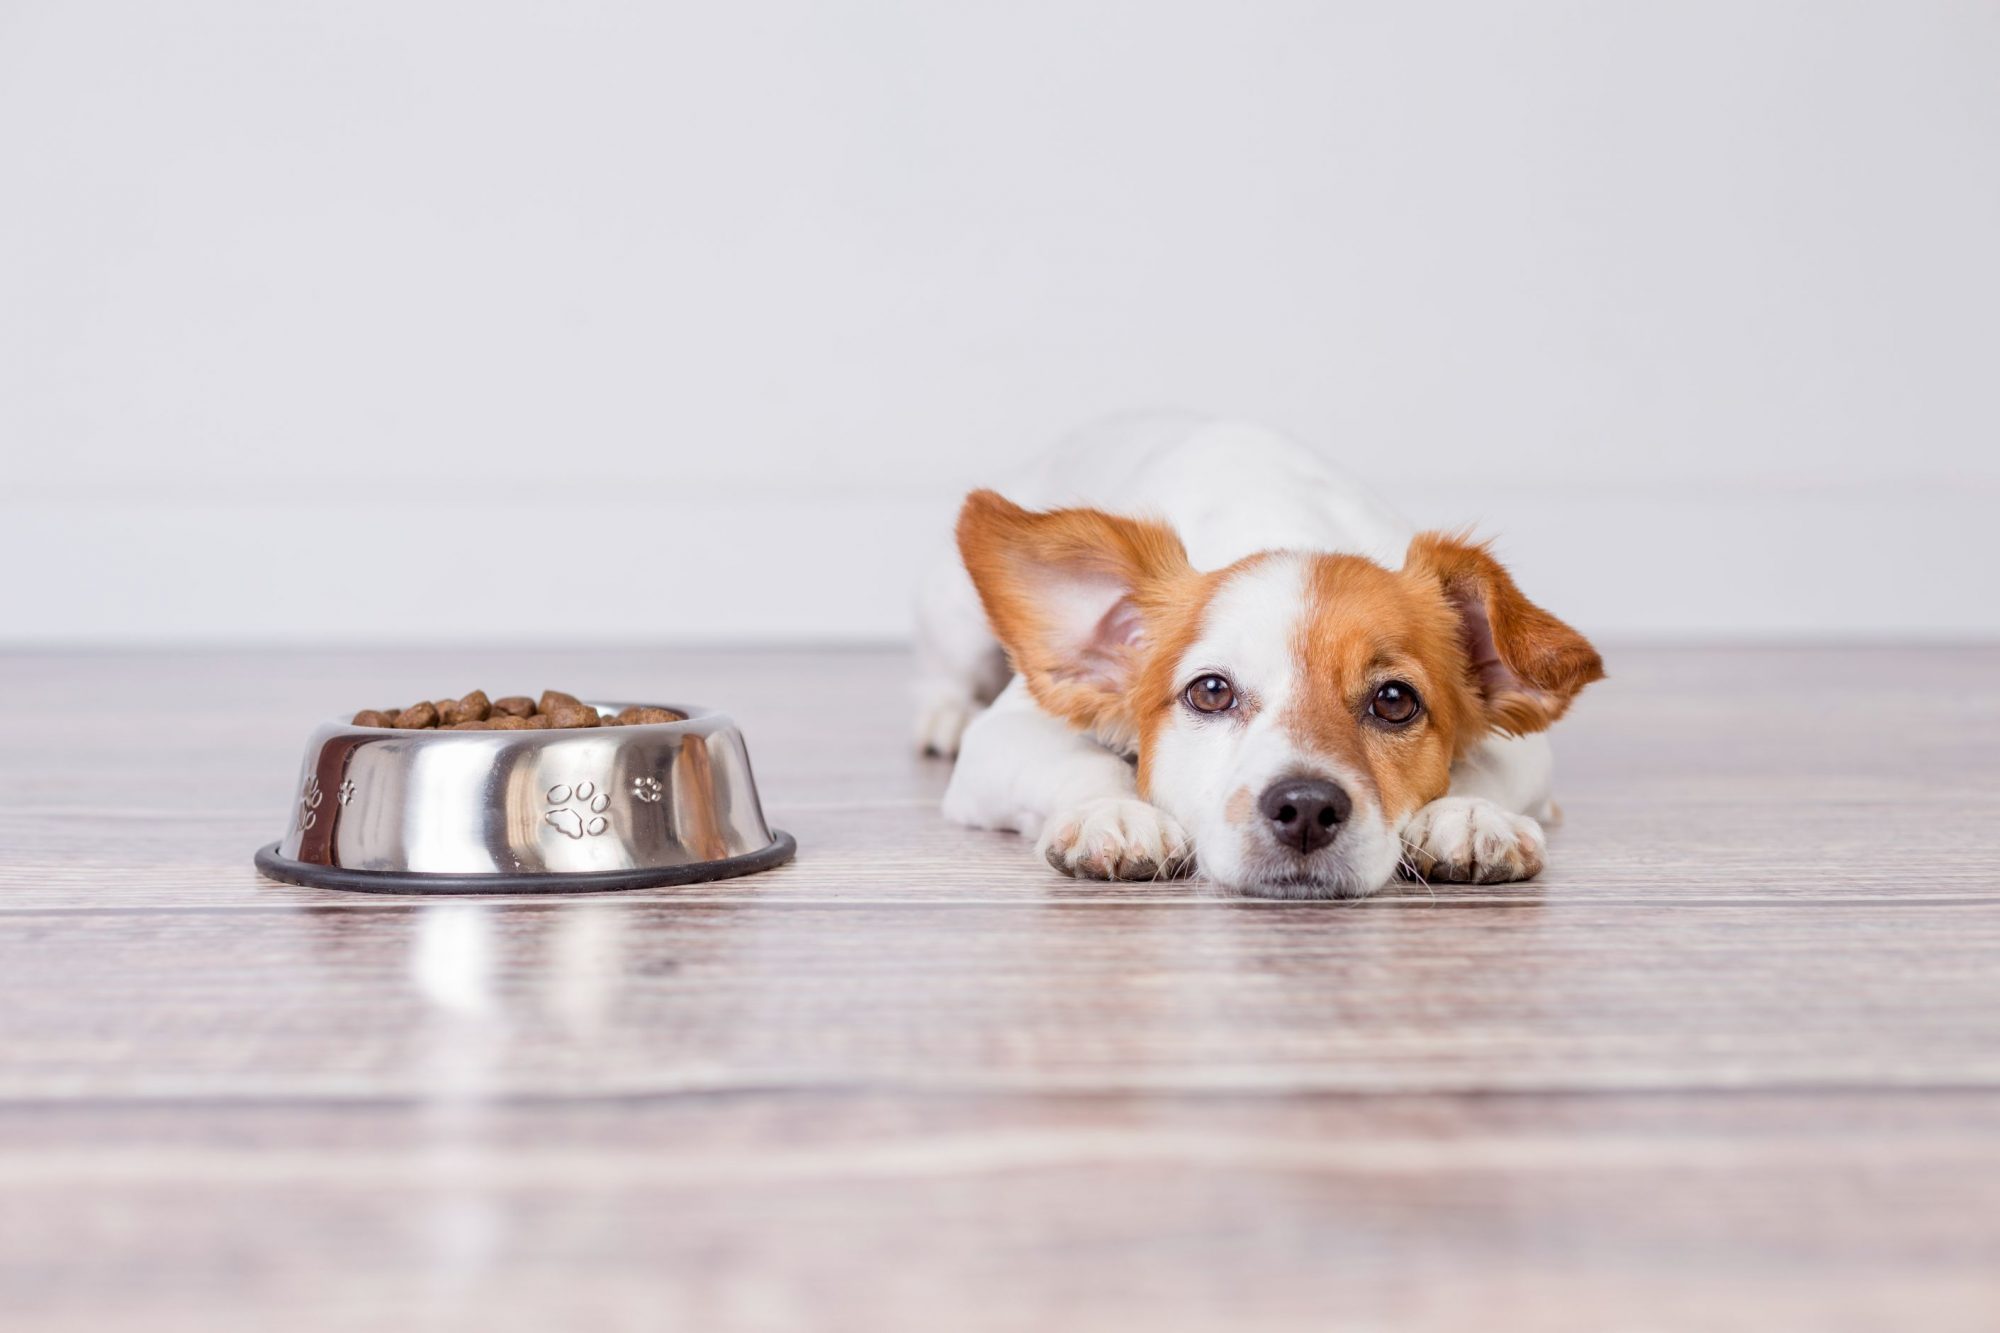 Dog Enrichment 101 What You Need To Know